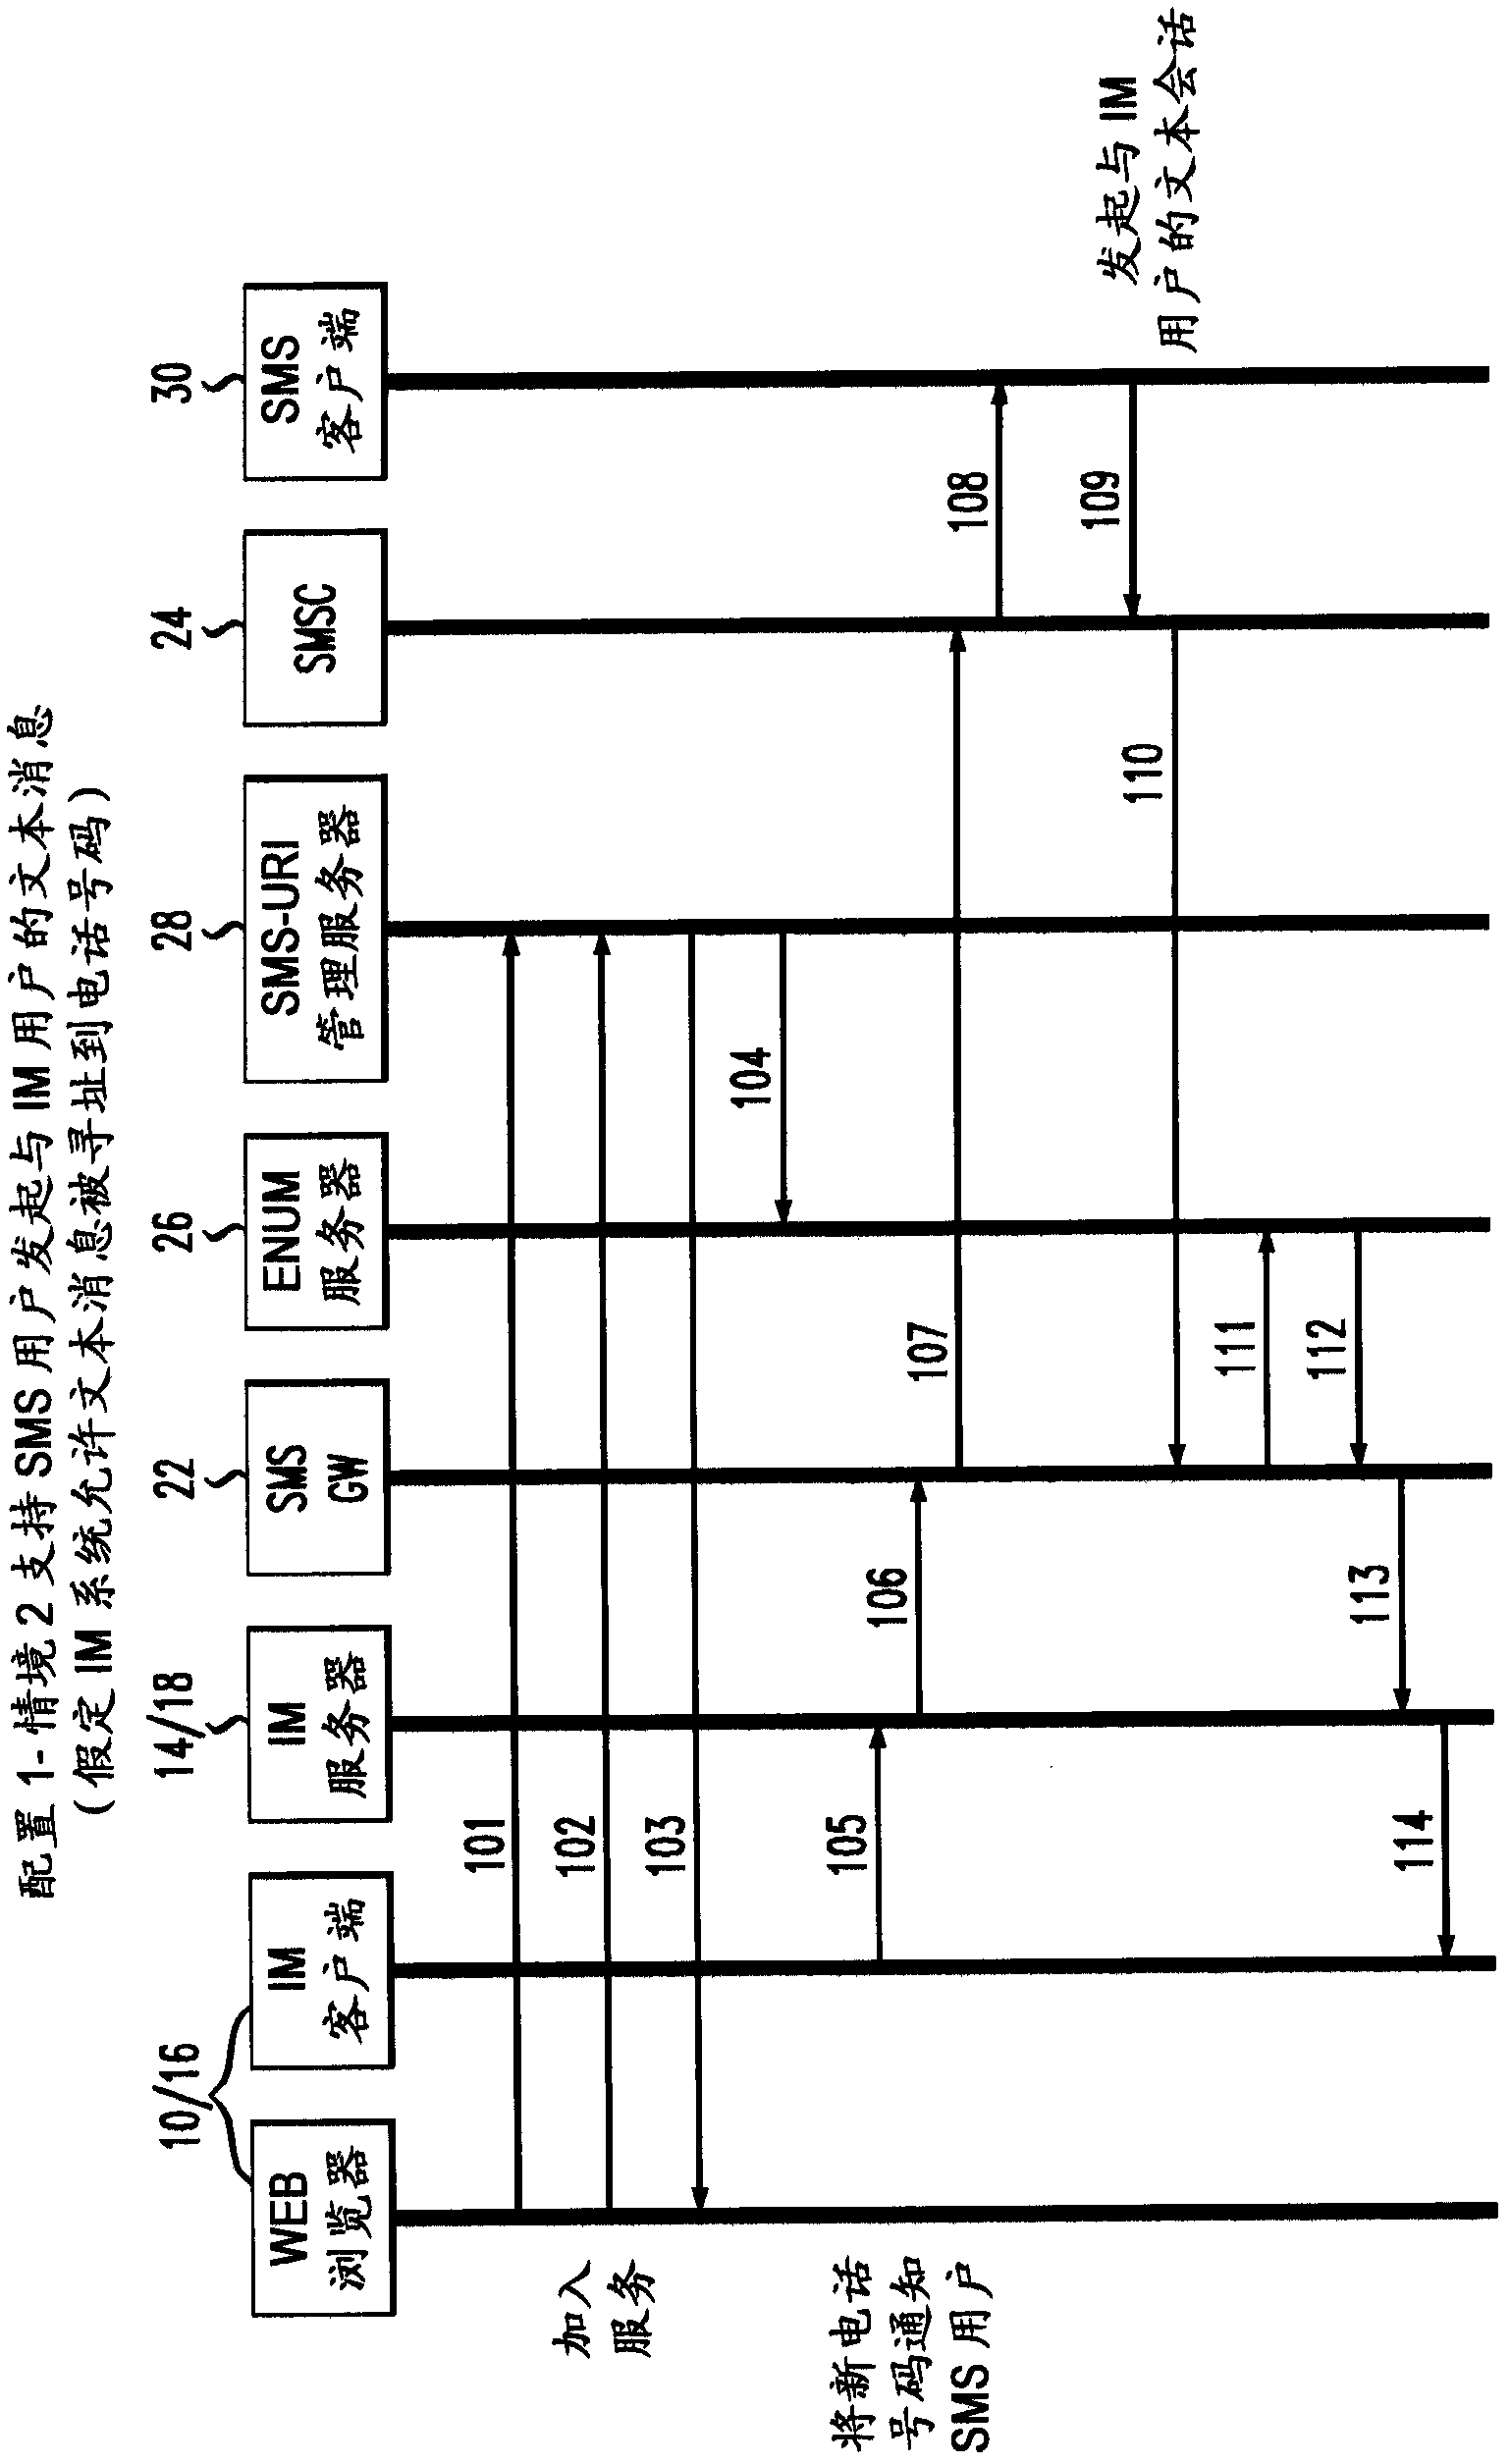 A method and system for interworking between instant messaging service and short message service